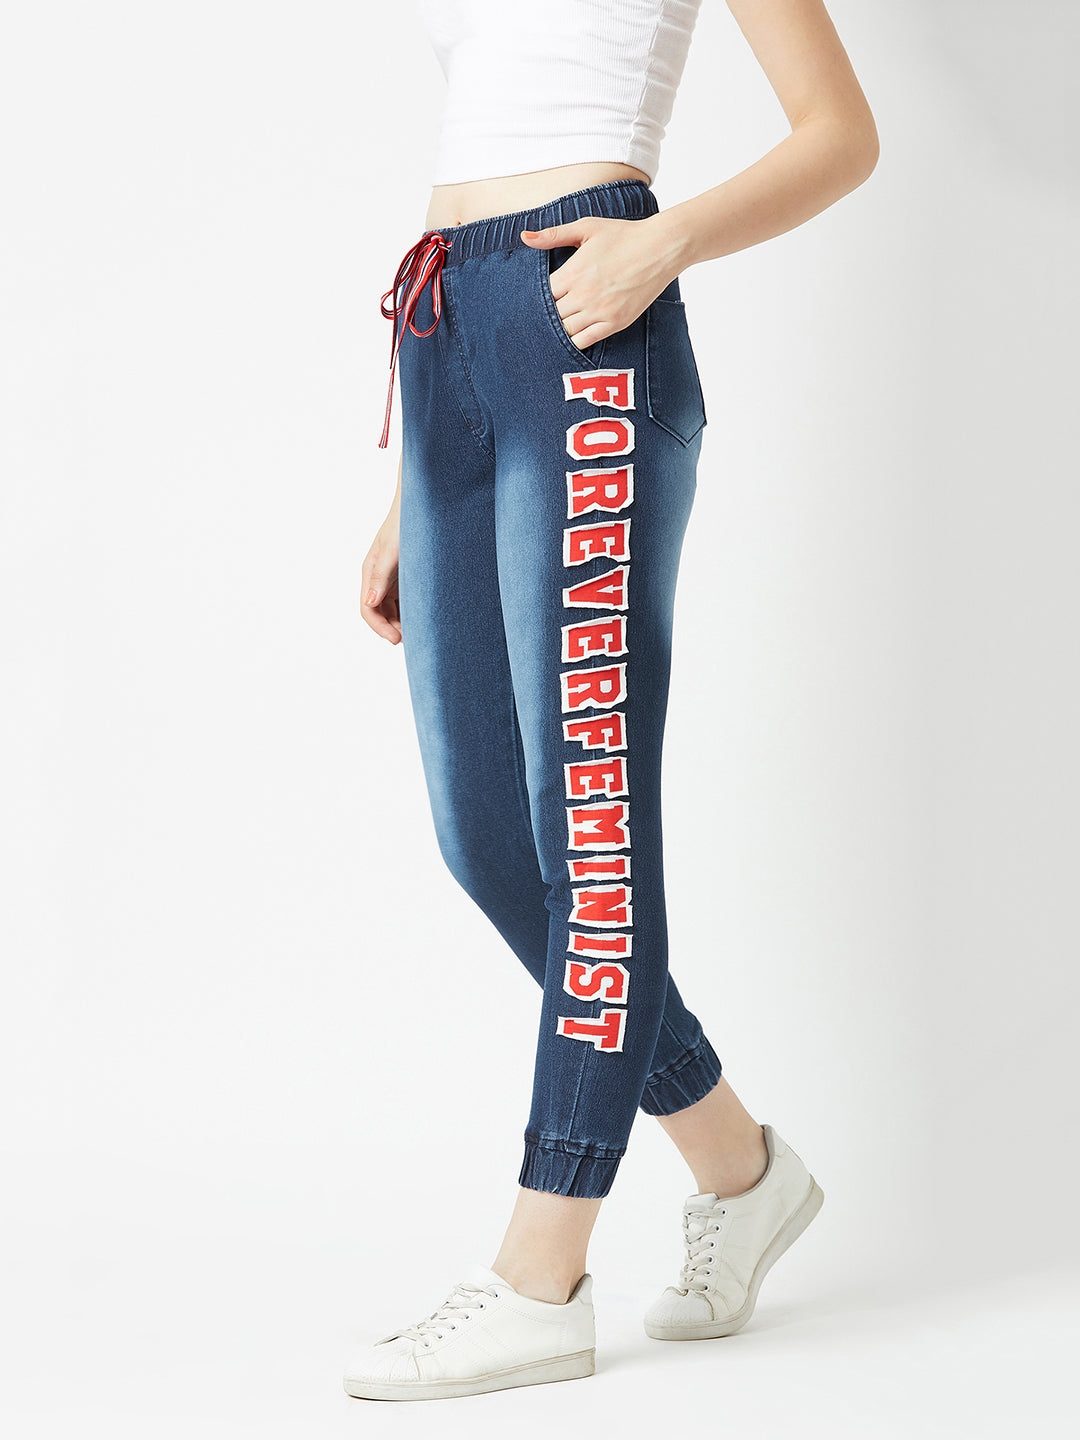 MISS CHASE | Navy Blue Regular Fit Mid Rise Clean Look Regular Length Stretchable Denim Jogger